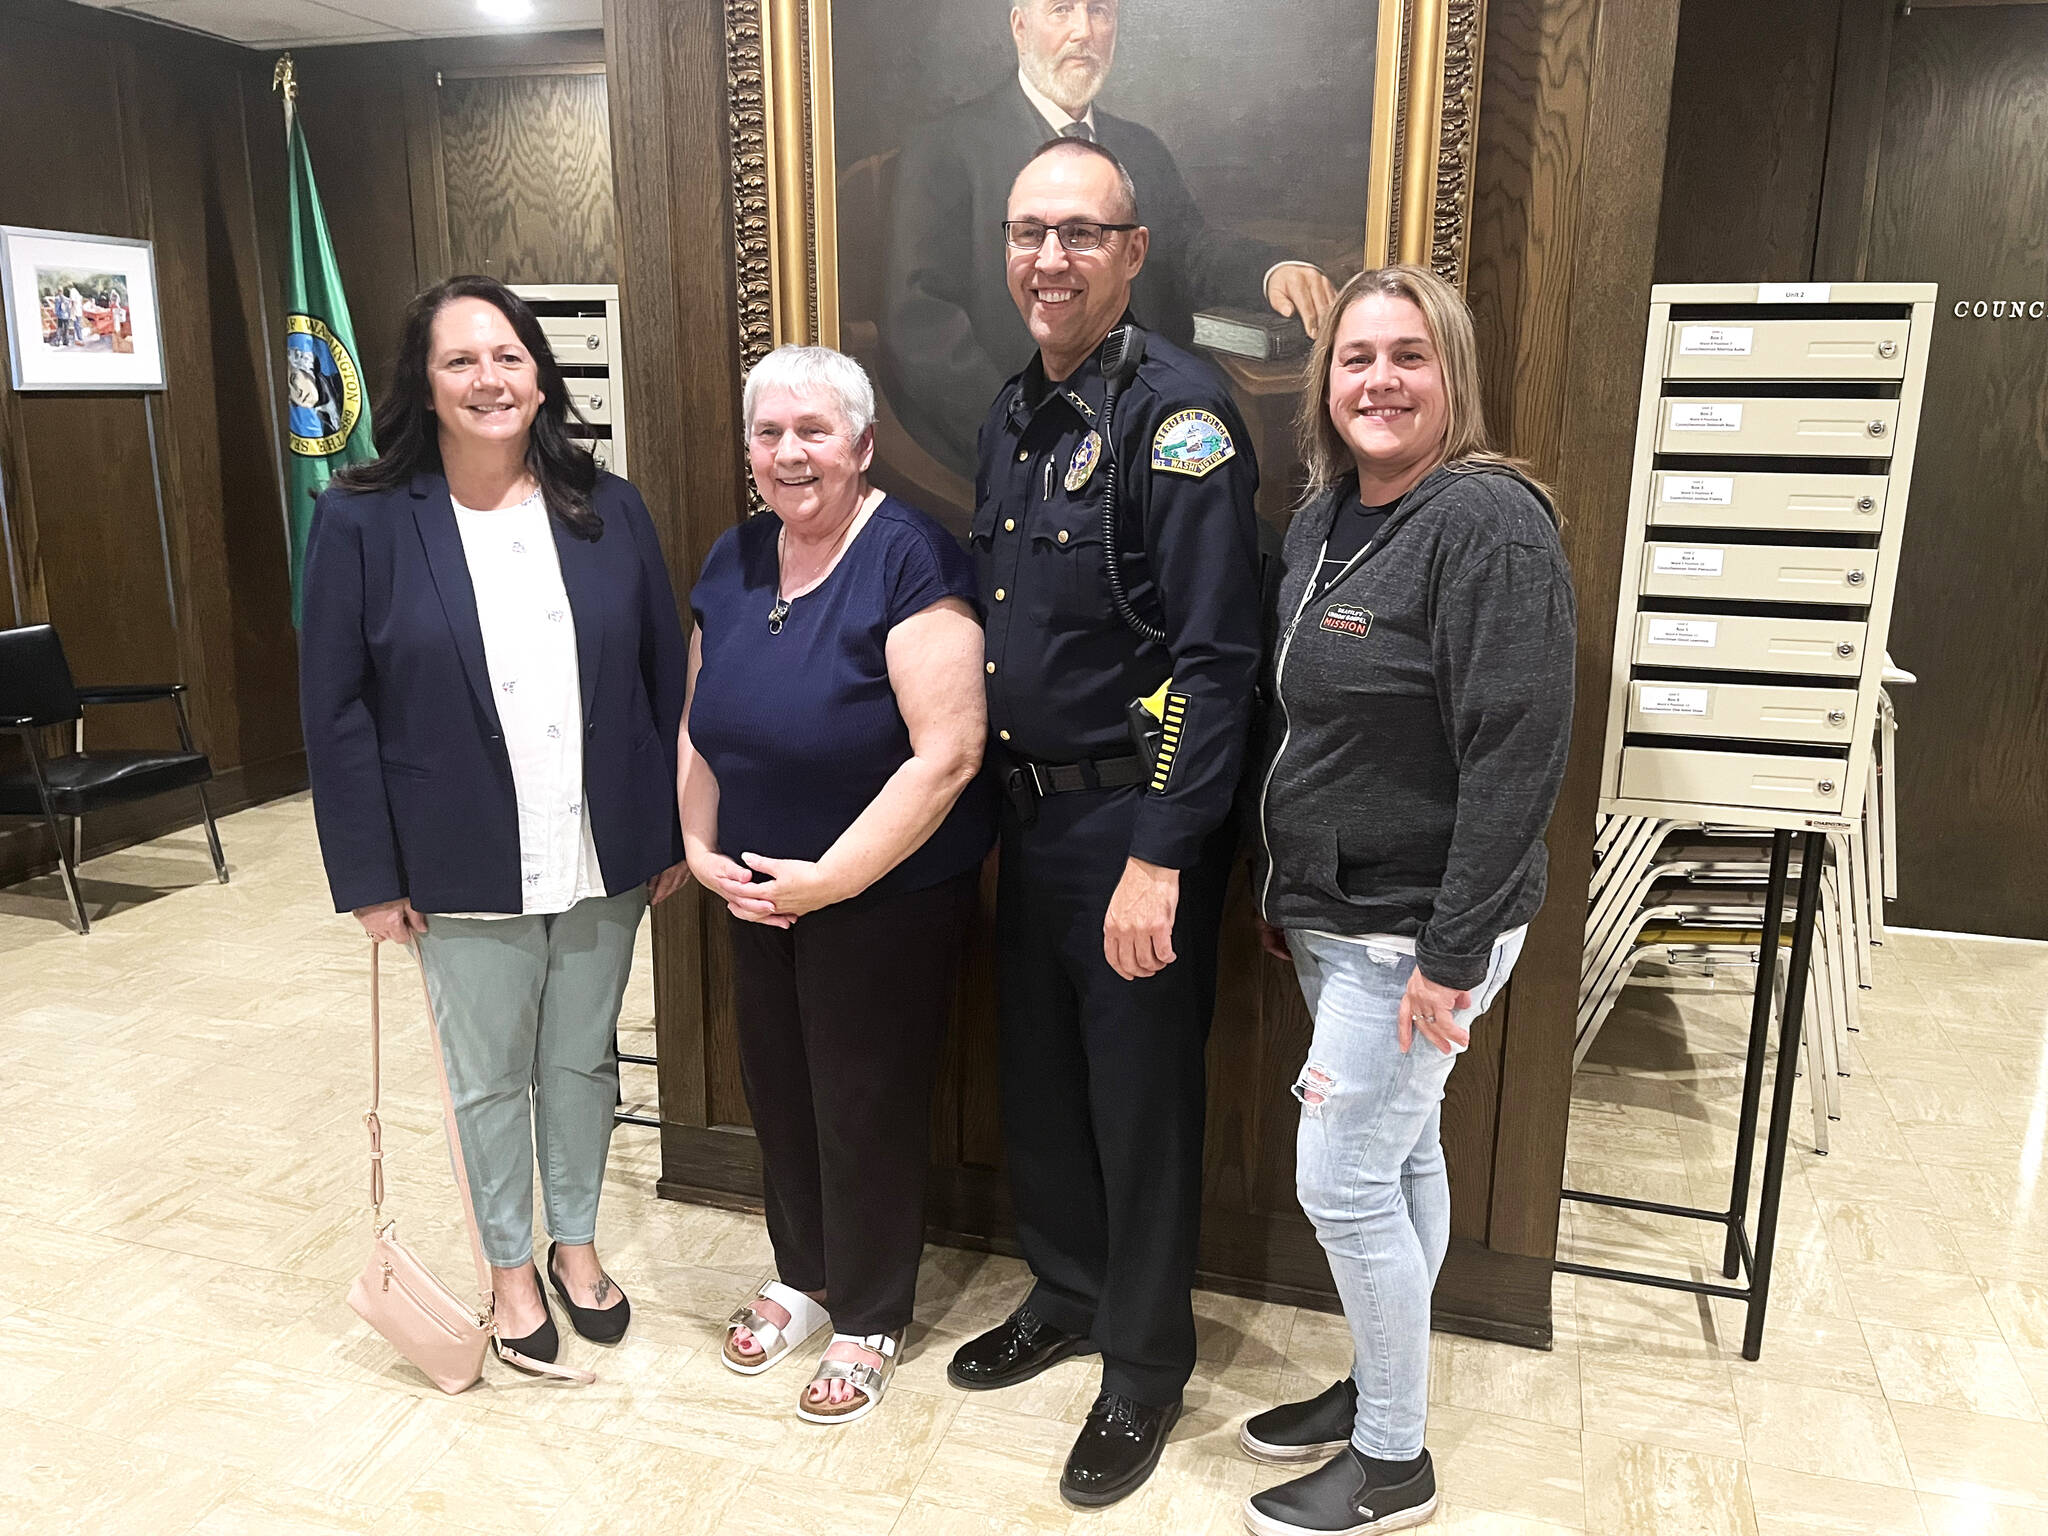 (Matthew N. Wells | The Daily World) Aberdeen Police Department Chief Steve Shumate stands from left, with his wife Mandy, his mother Charlotte, and his sister Cindy Stutesman. Shumate, retiring June 30, 2022, after 33 years of service combined in Grays Harbor County, is “ready for a break.” His family is excited to have him back home. Mandy can’t wait for him to fulfill his promise to her, which is to cook for her every night.